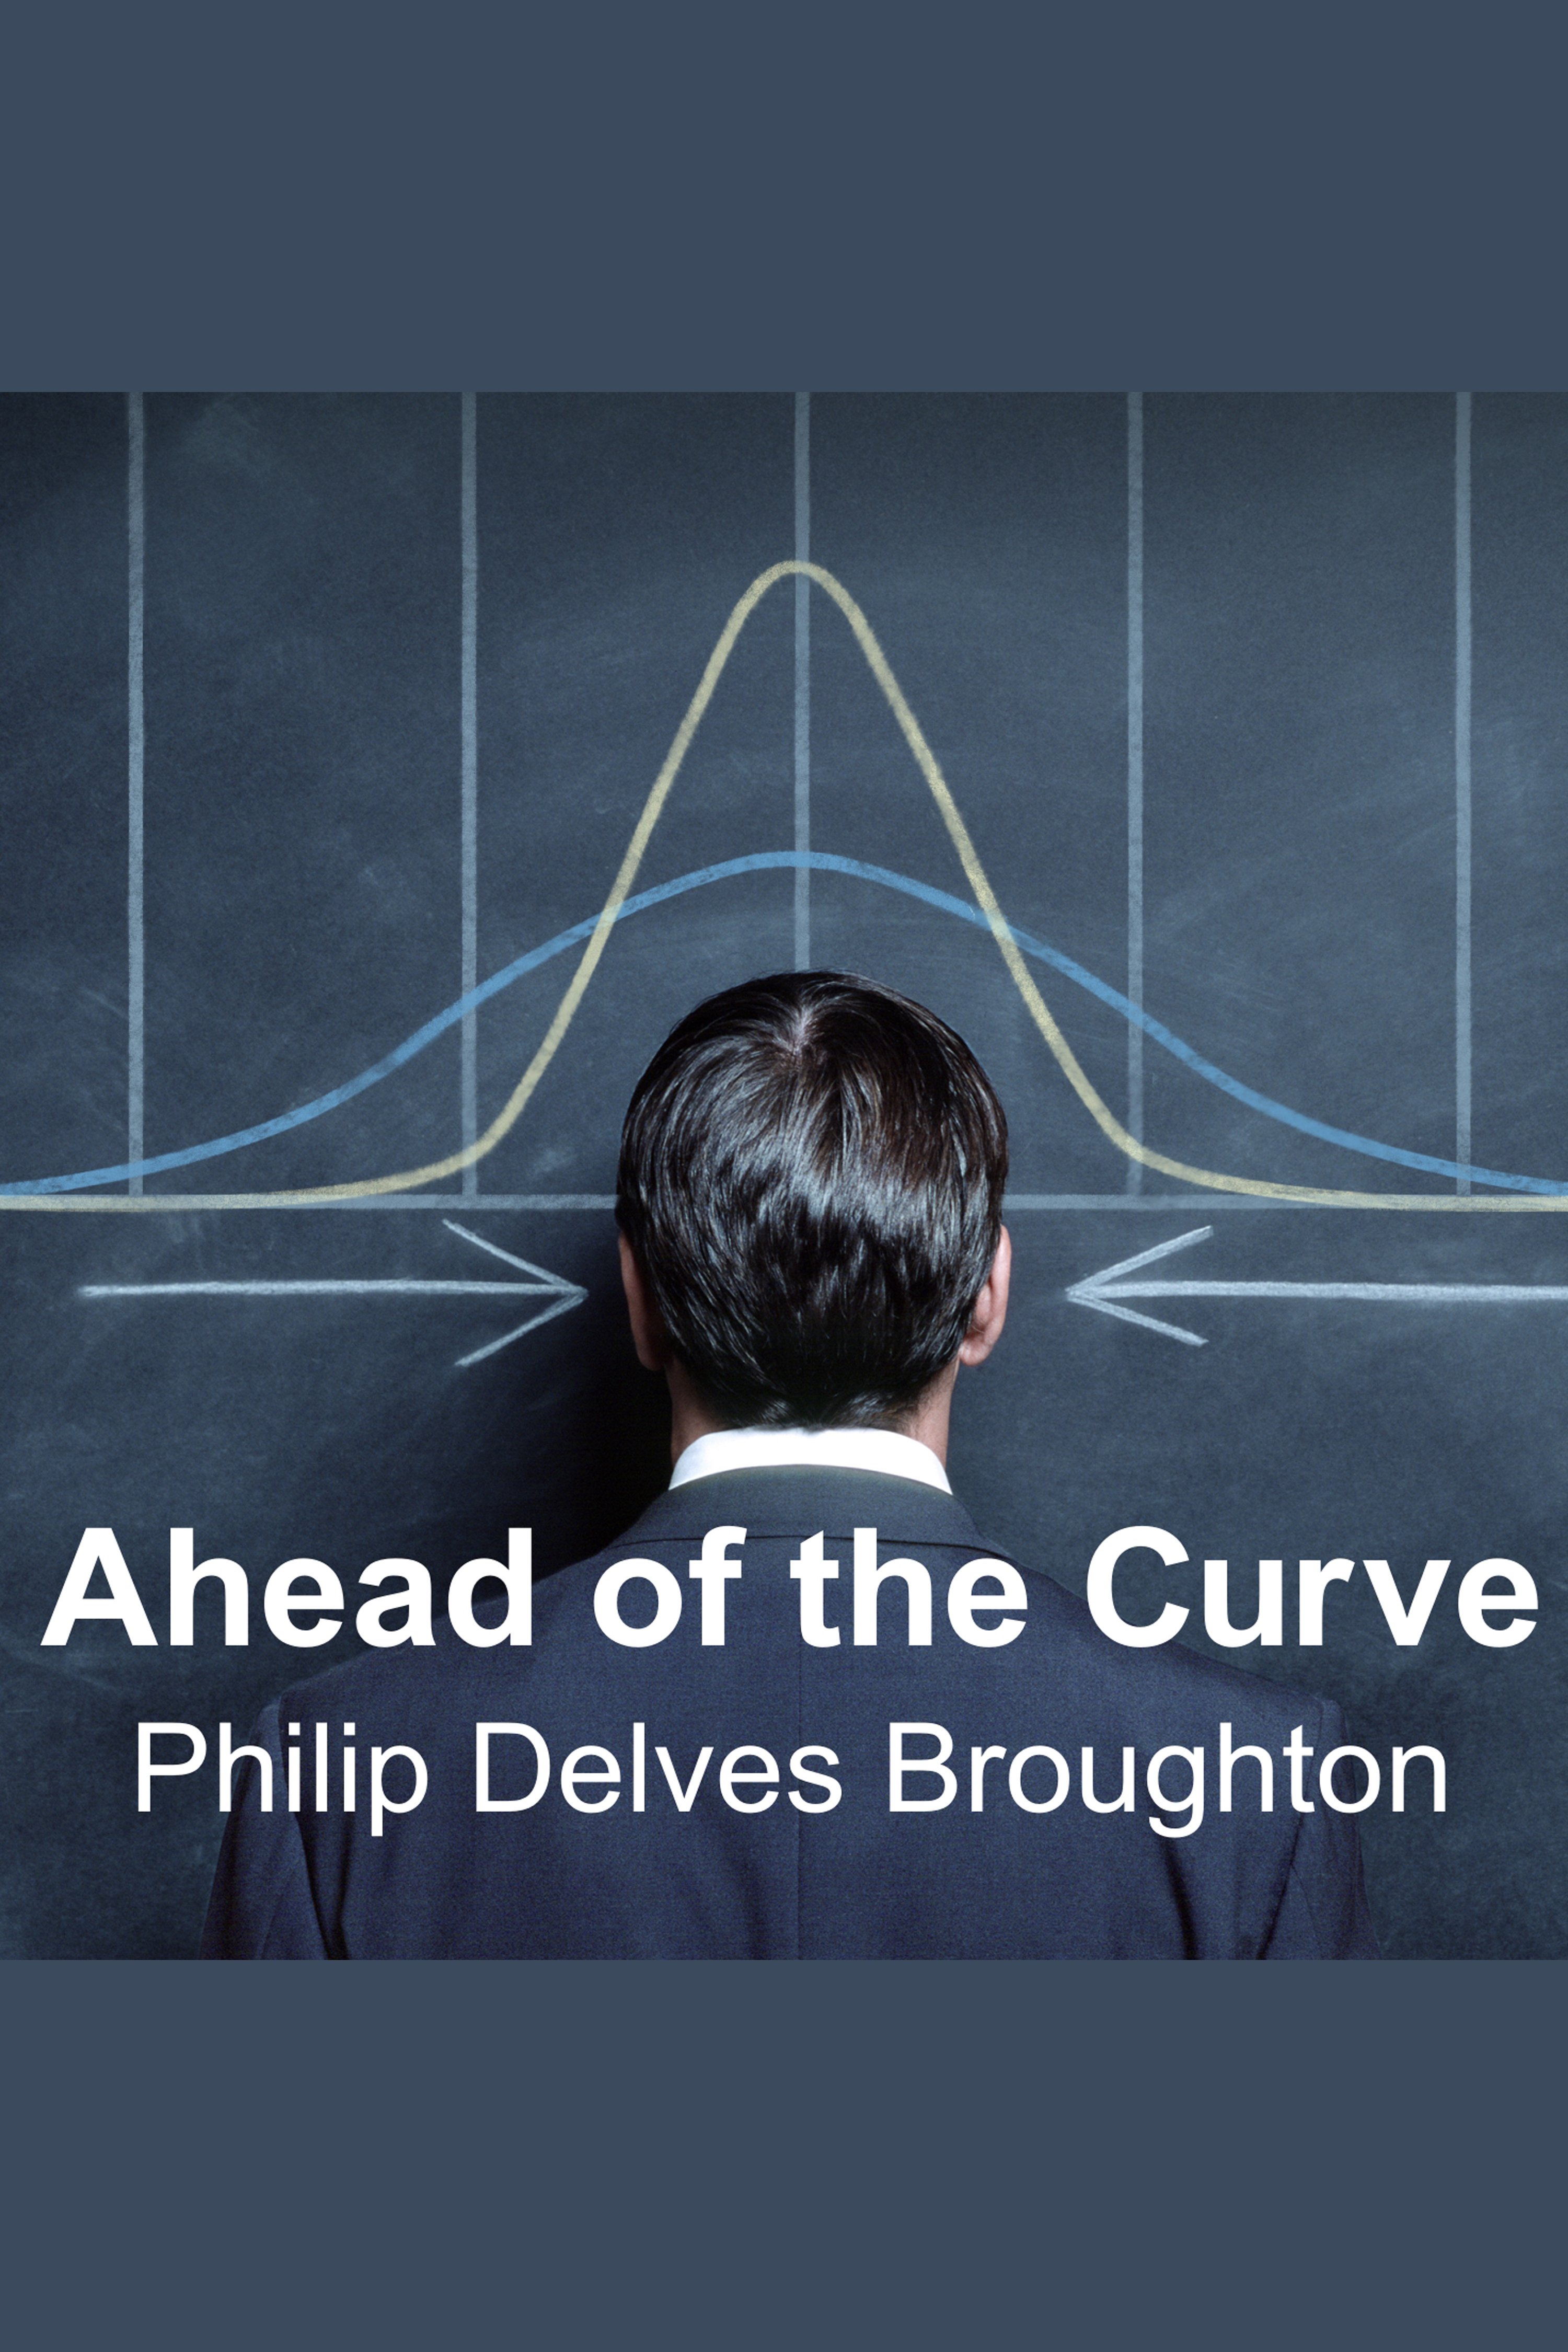 Ahead of the curve two years at Harvard Business School cover image